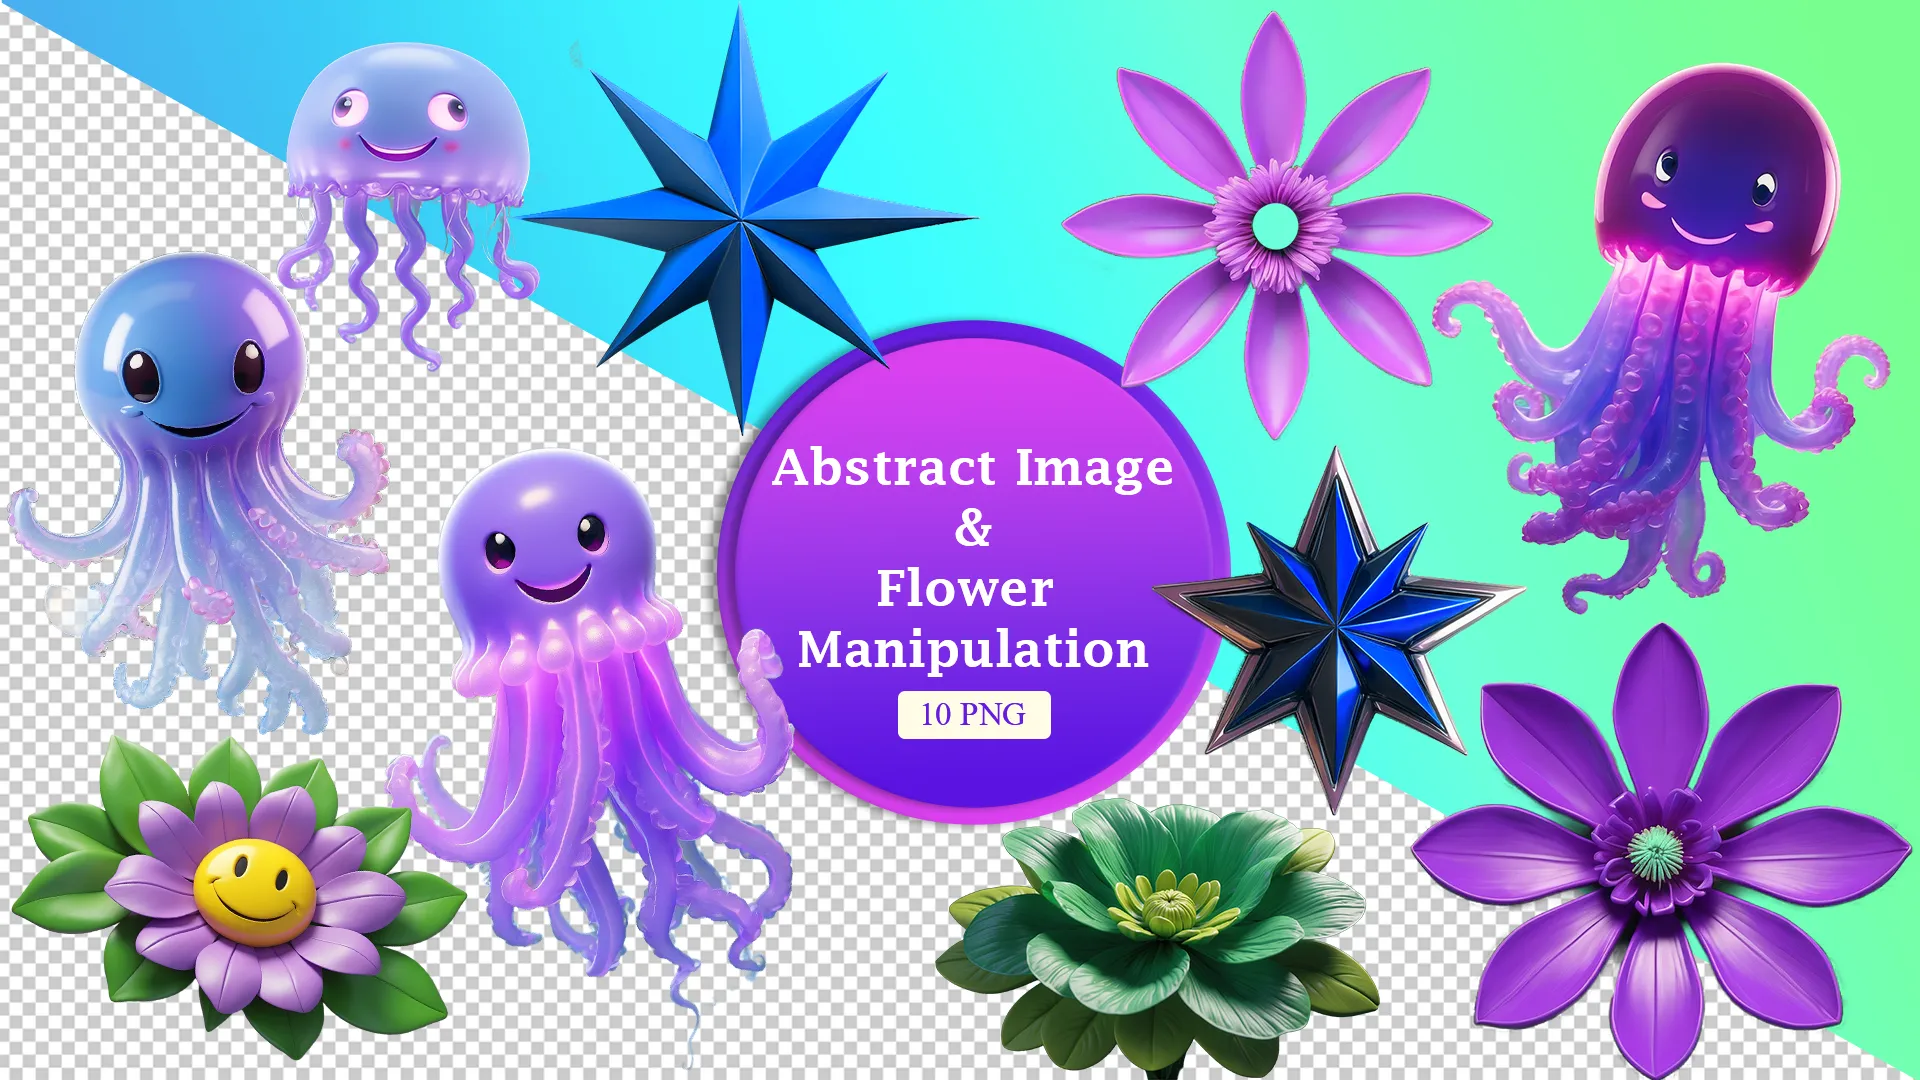 Enchanting Sea Creatures and Blossoms PNG Pack image